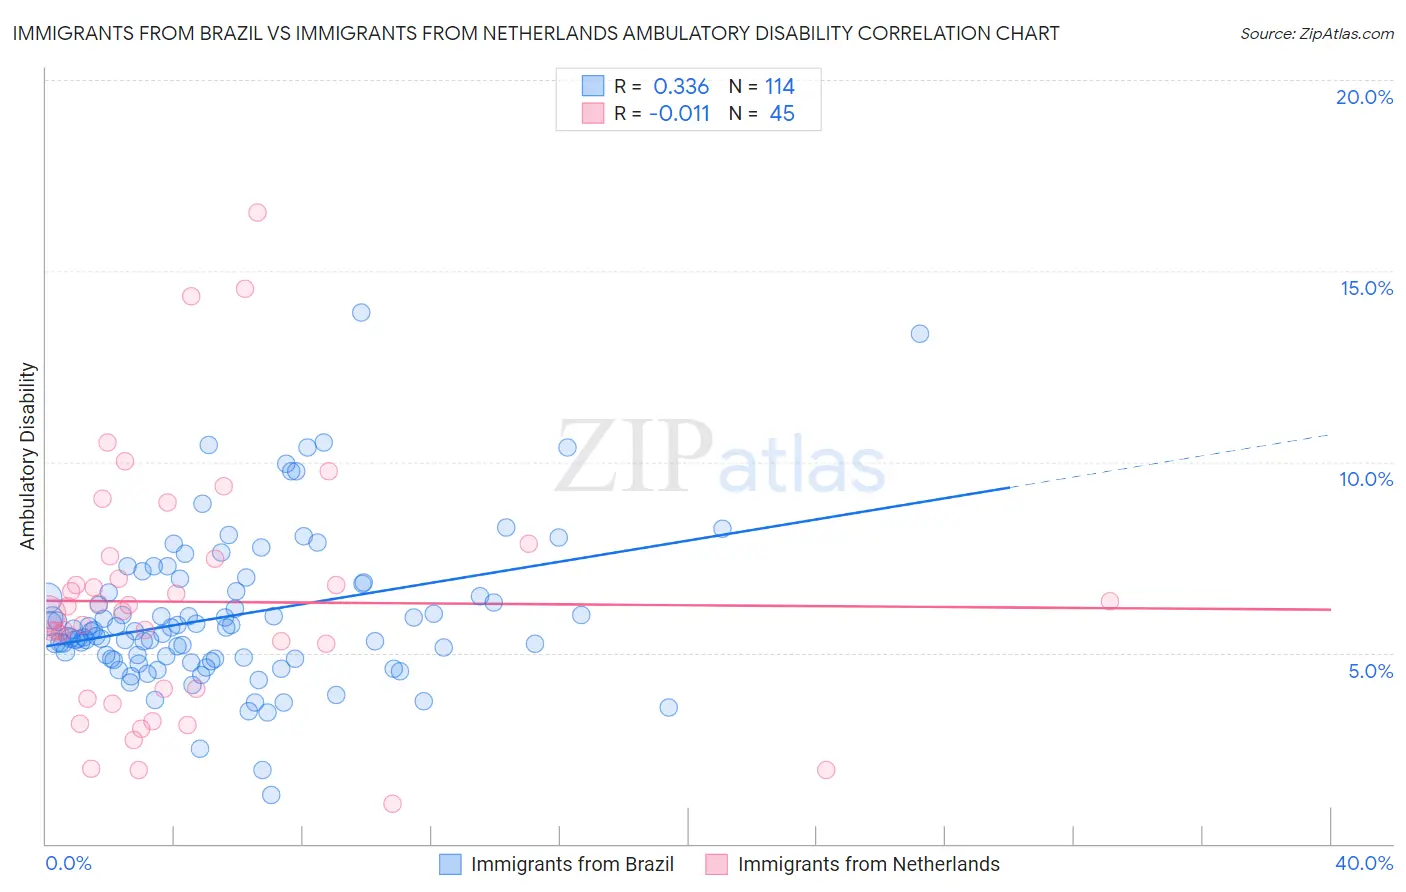 Immigrants from Brazil vs Immigrants from Netherlands Ambulatory Disability